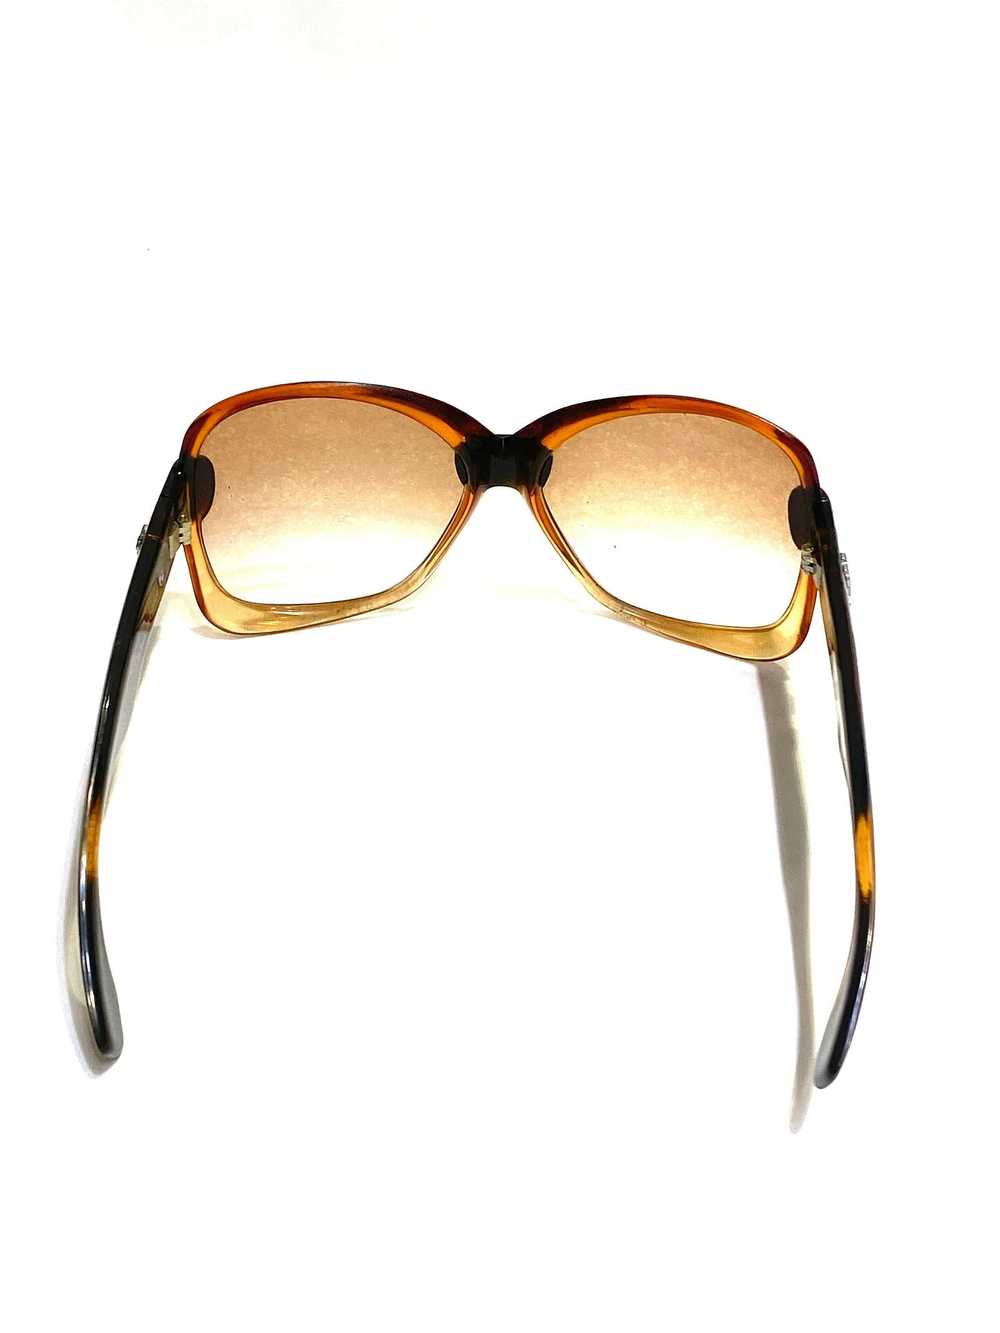 Vintage YSL Brown and Black Square Sunglasses - image 12